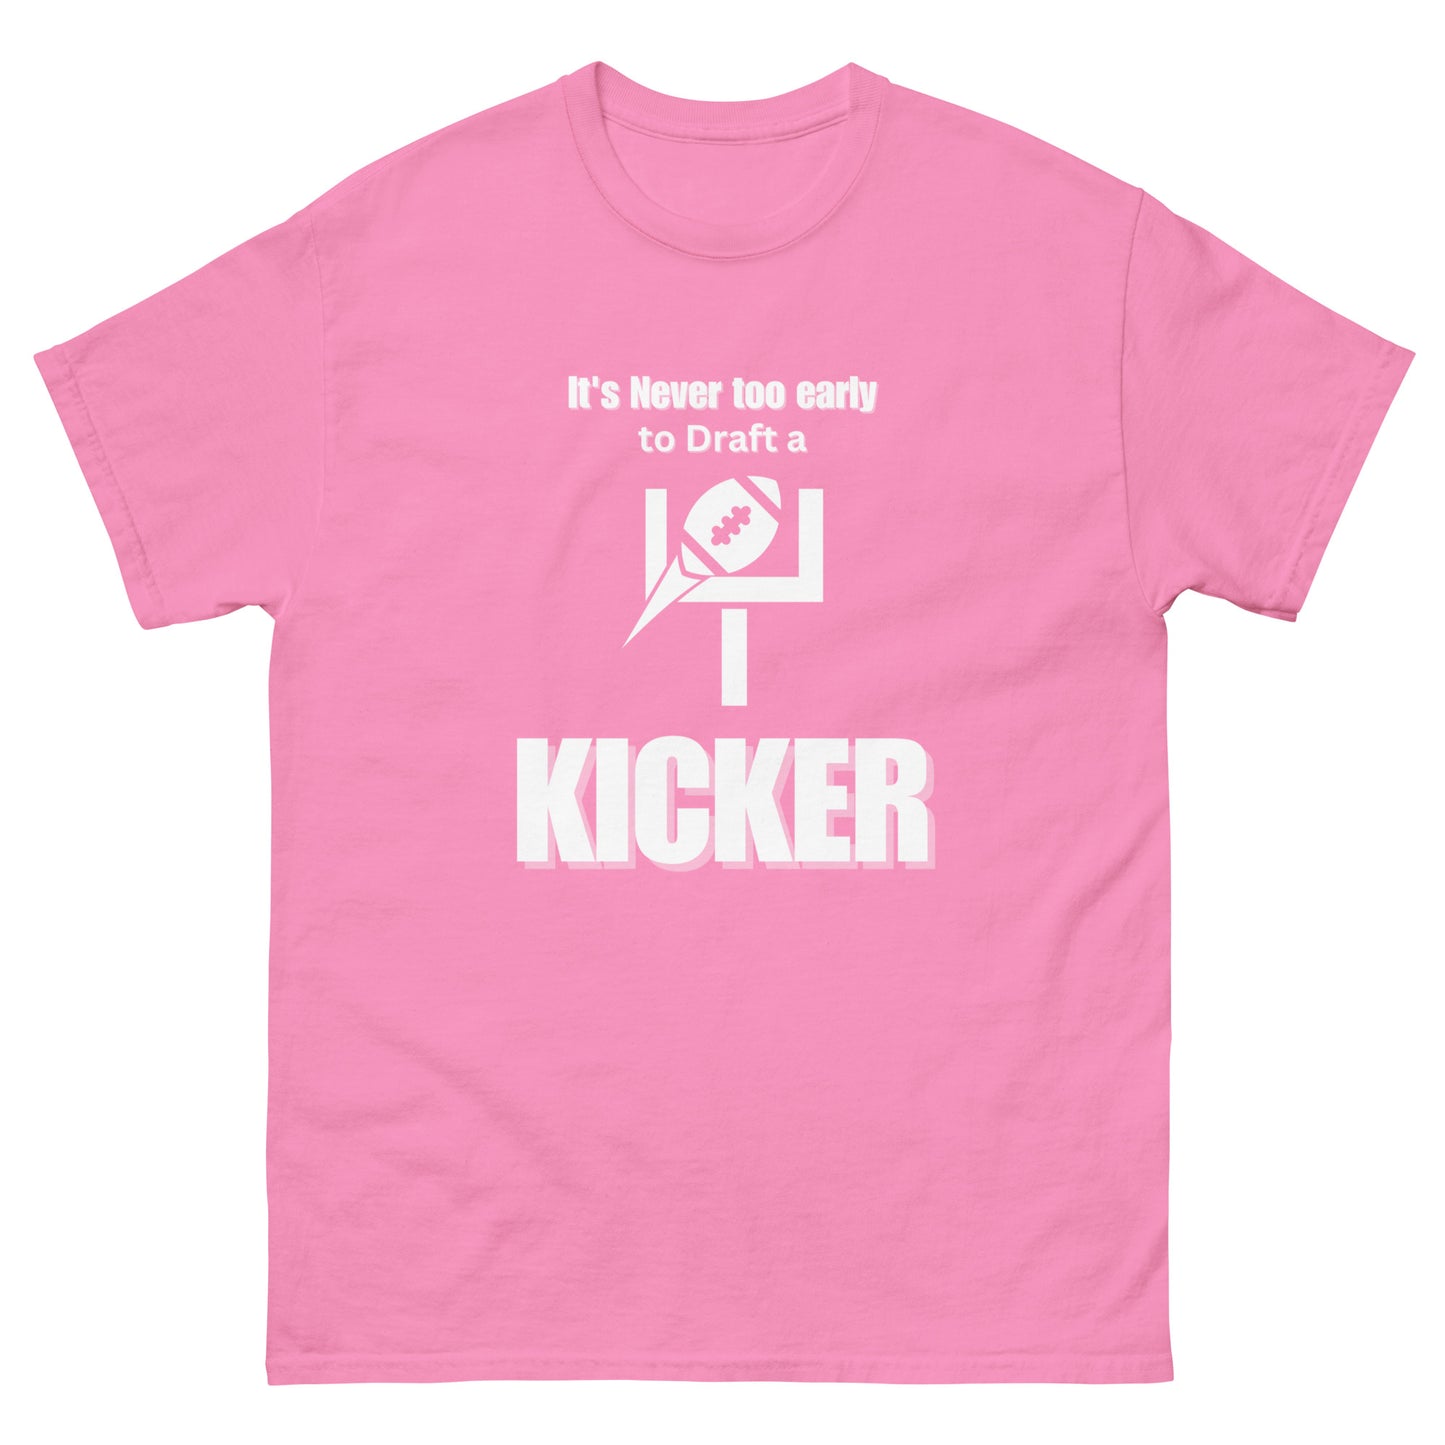 It's Never Too Early To Draft a Kicker